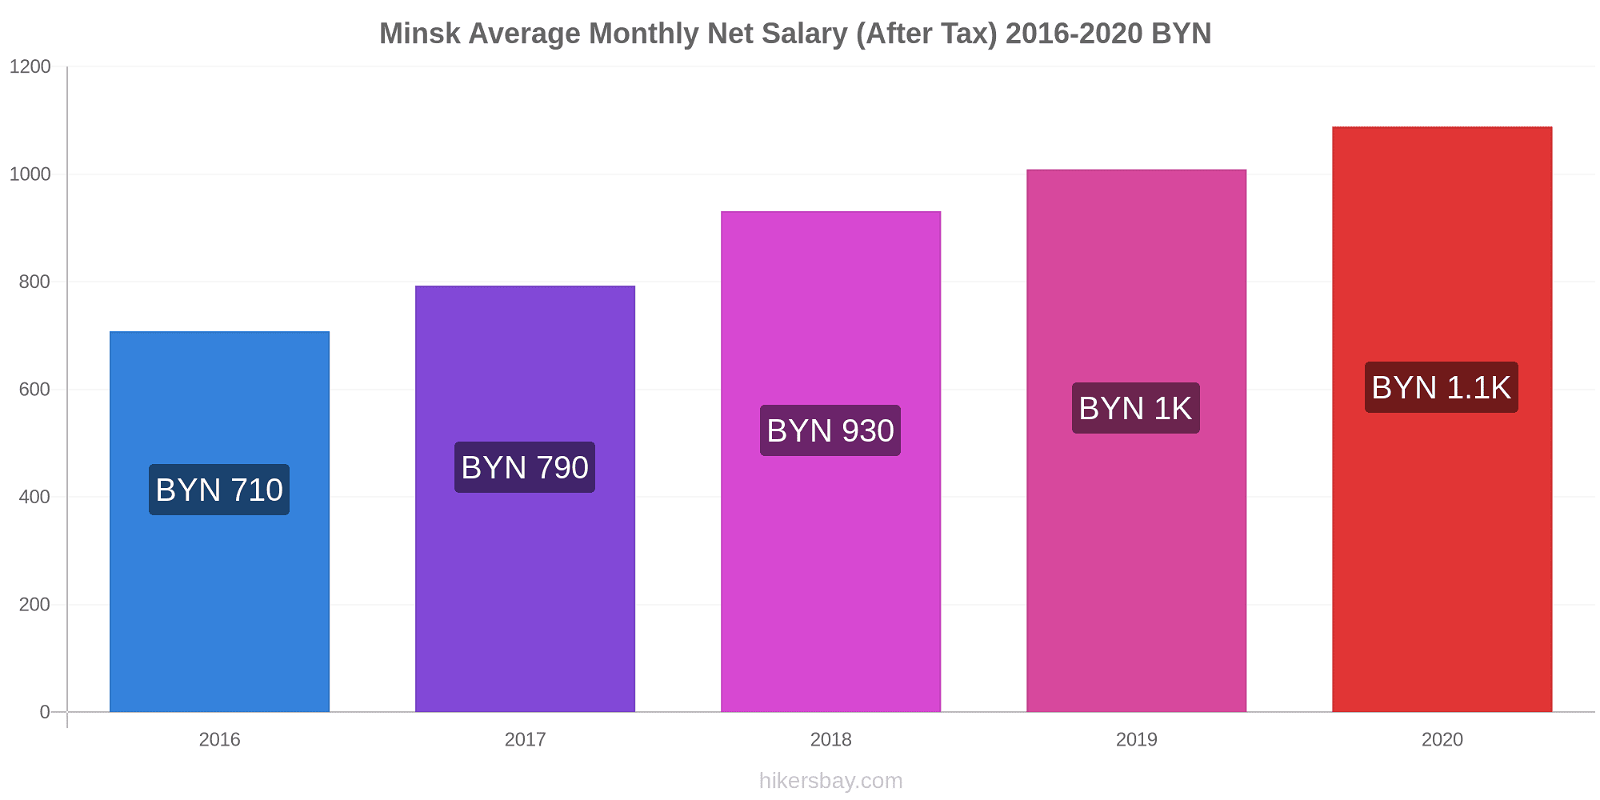 Minsk price changes Average Monthly Net Salary (After Tax) hikersbay.com